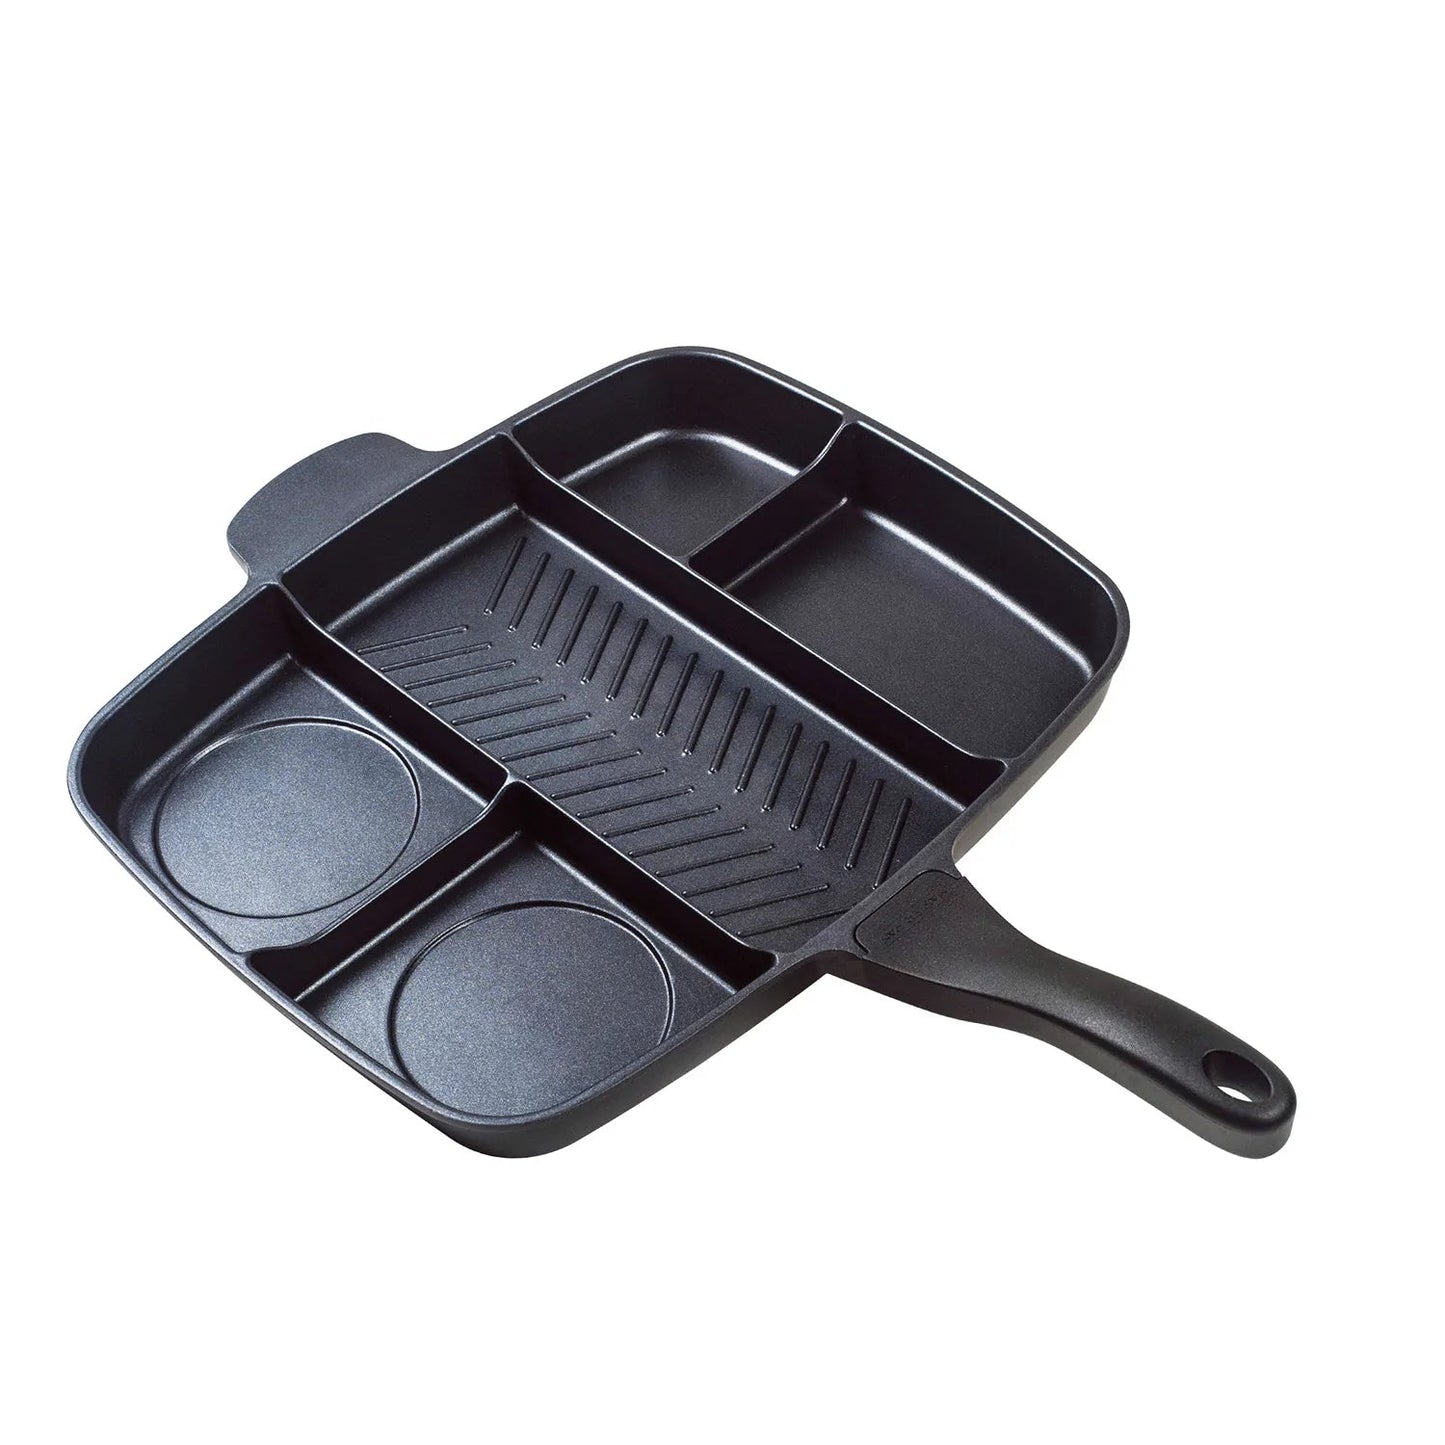 MASTERPAN Innovative Series 15” 5-Section Non-stick Cast Aluminum Grill and Griddle Skillet